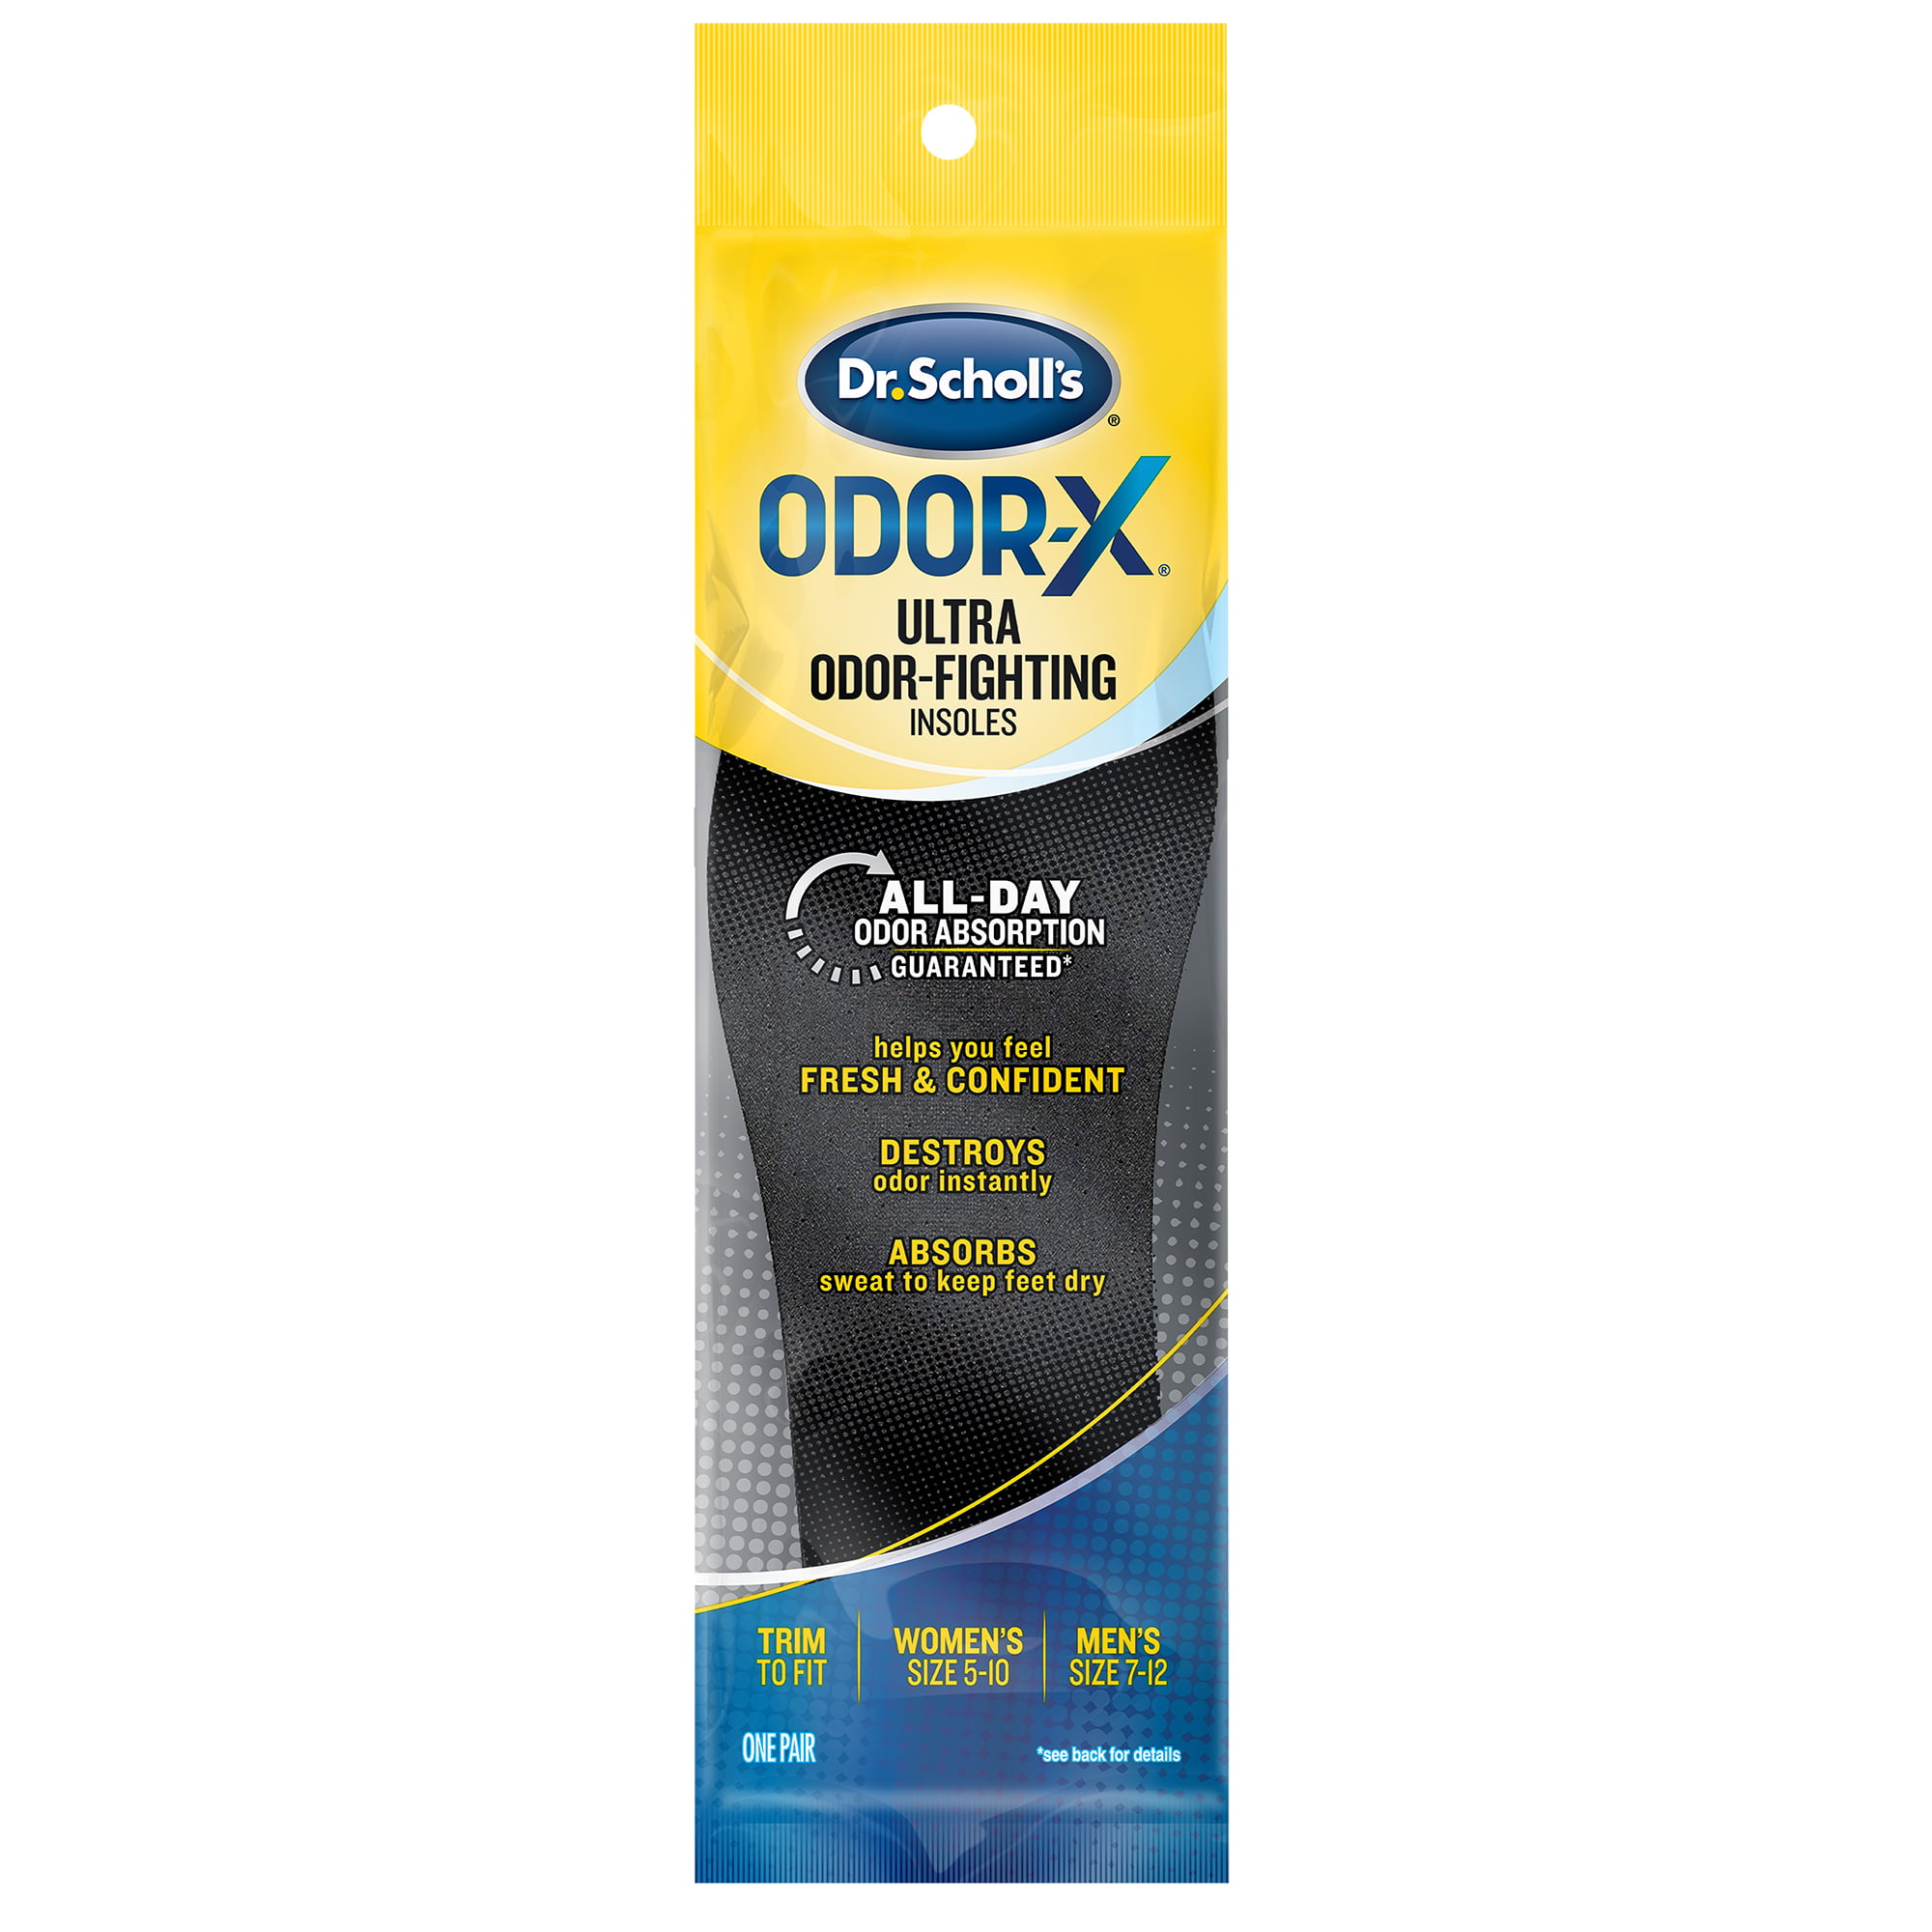 2 PAIRS OF ANTI ODOUR EATER INSOLES ACTIVATED CHARCOAL 4 INSOLES IN TOTAL 